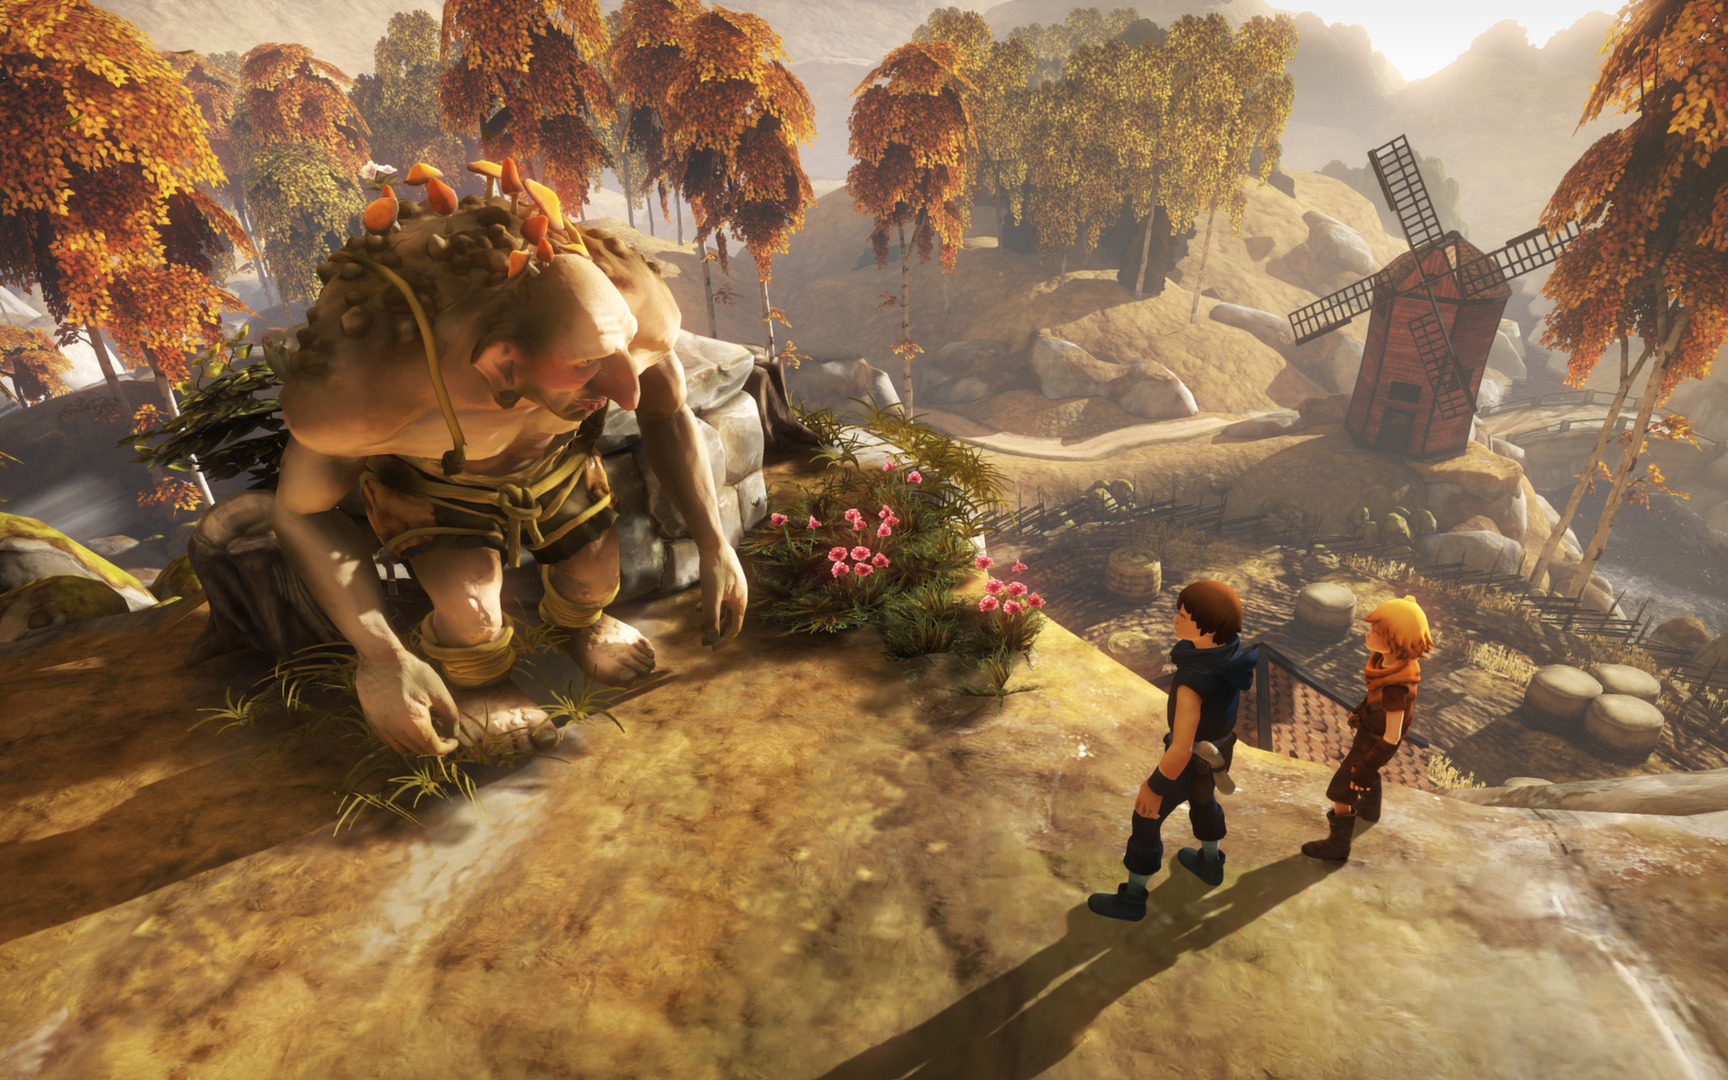 brothers a tale of two sons two player download